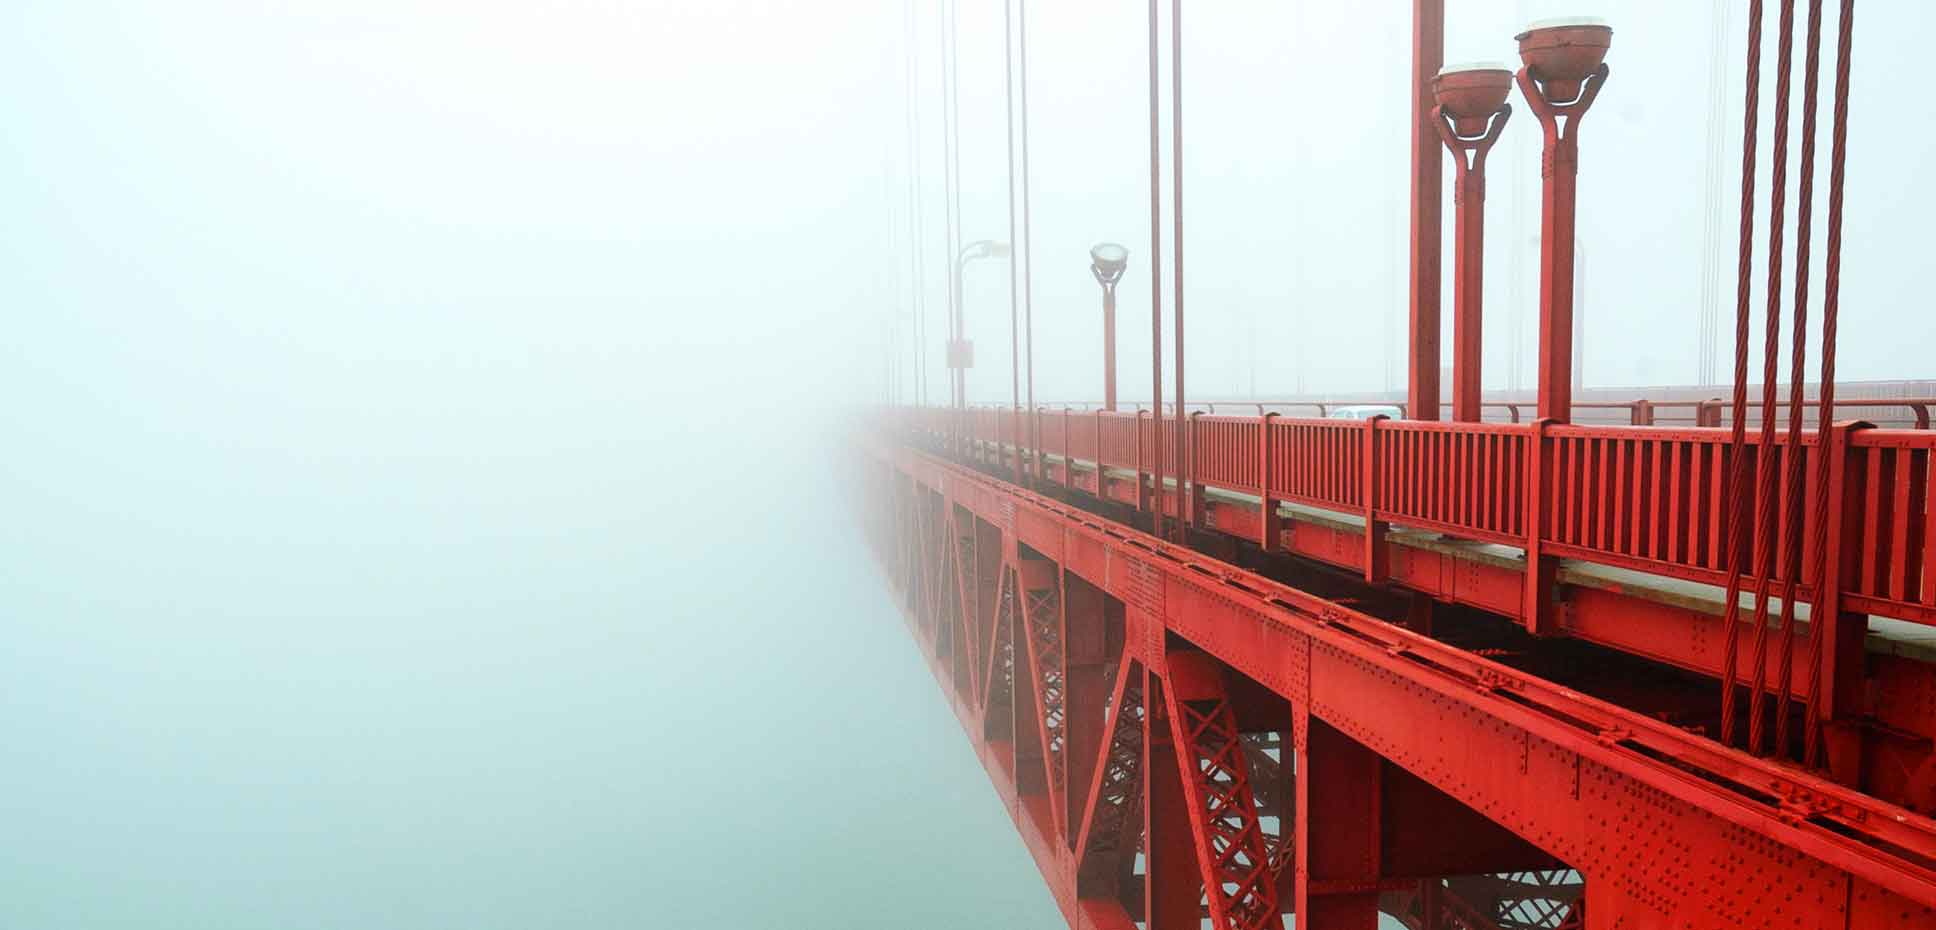 Golden Gate Bridge disappearing into the fog